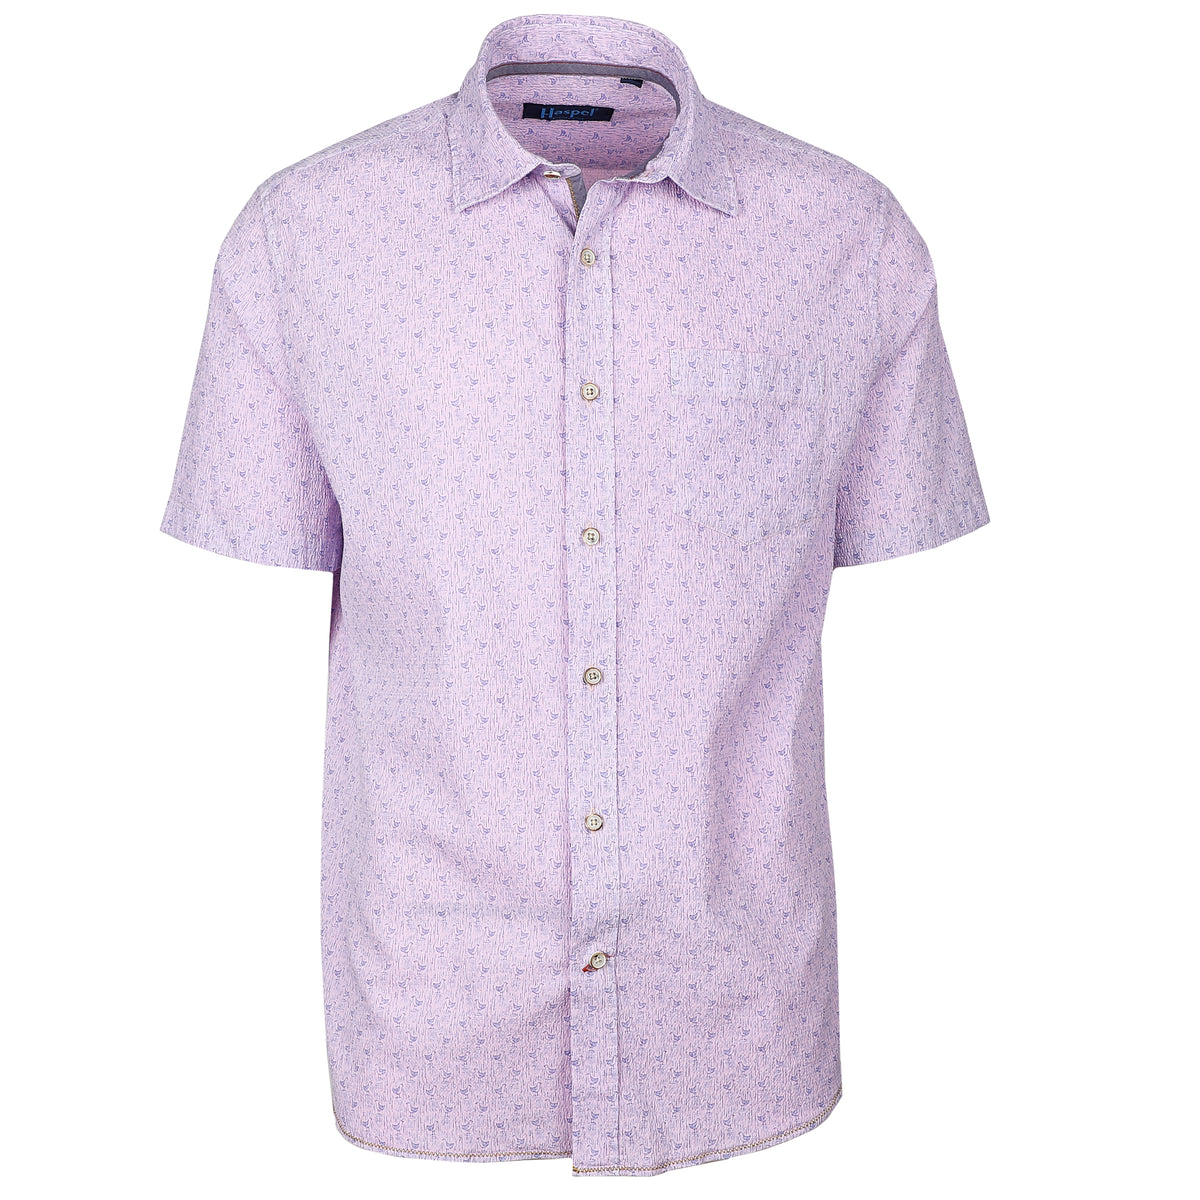 Be effortlessly stylish and comfortable in any season with the Paestum Pink Early Bird Short Sleeve Shirt. Made from lightweight seersucker fabric that&#39;s expertly dyed to create a distinctive look, this shirt will keep you looking cool even in warm weather. Get ready to turn heads with this striking style.  100% Cotton Seersucker • Short Sleeve • Spread Collar • No Chest Pocket • Machine Wash • Made in Italy